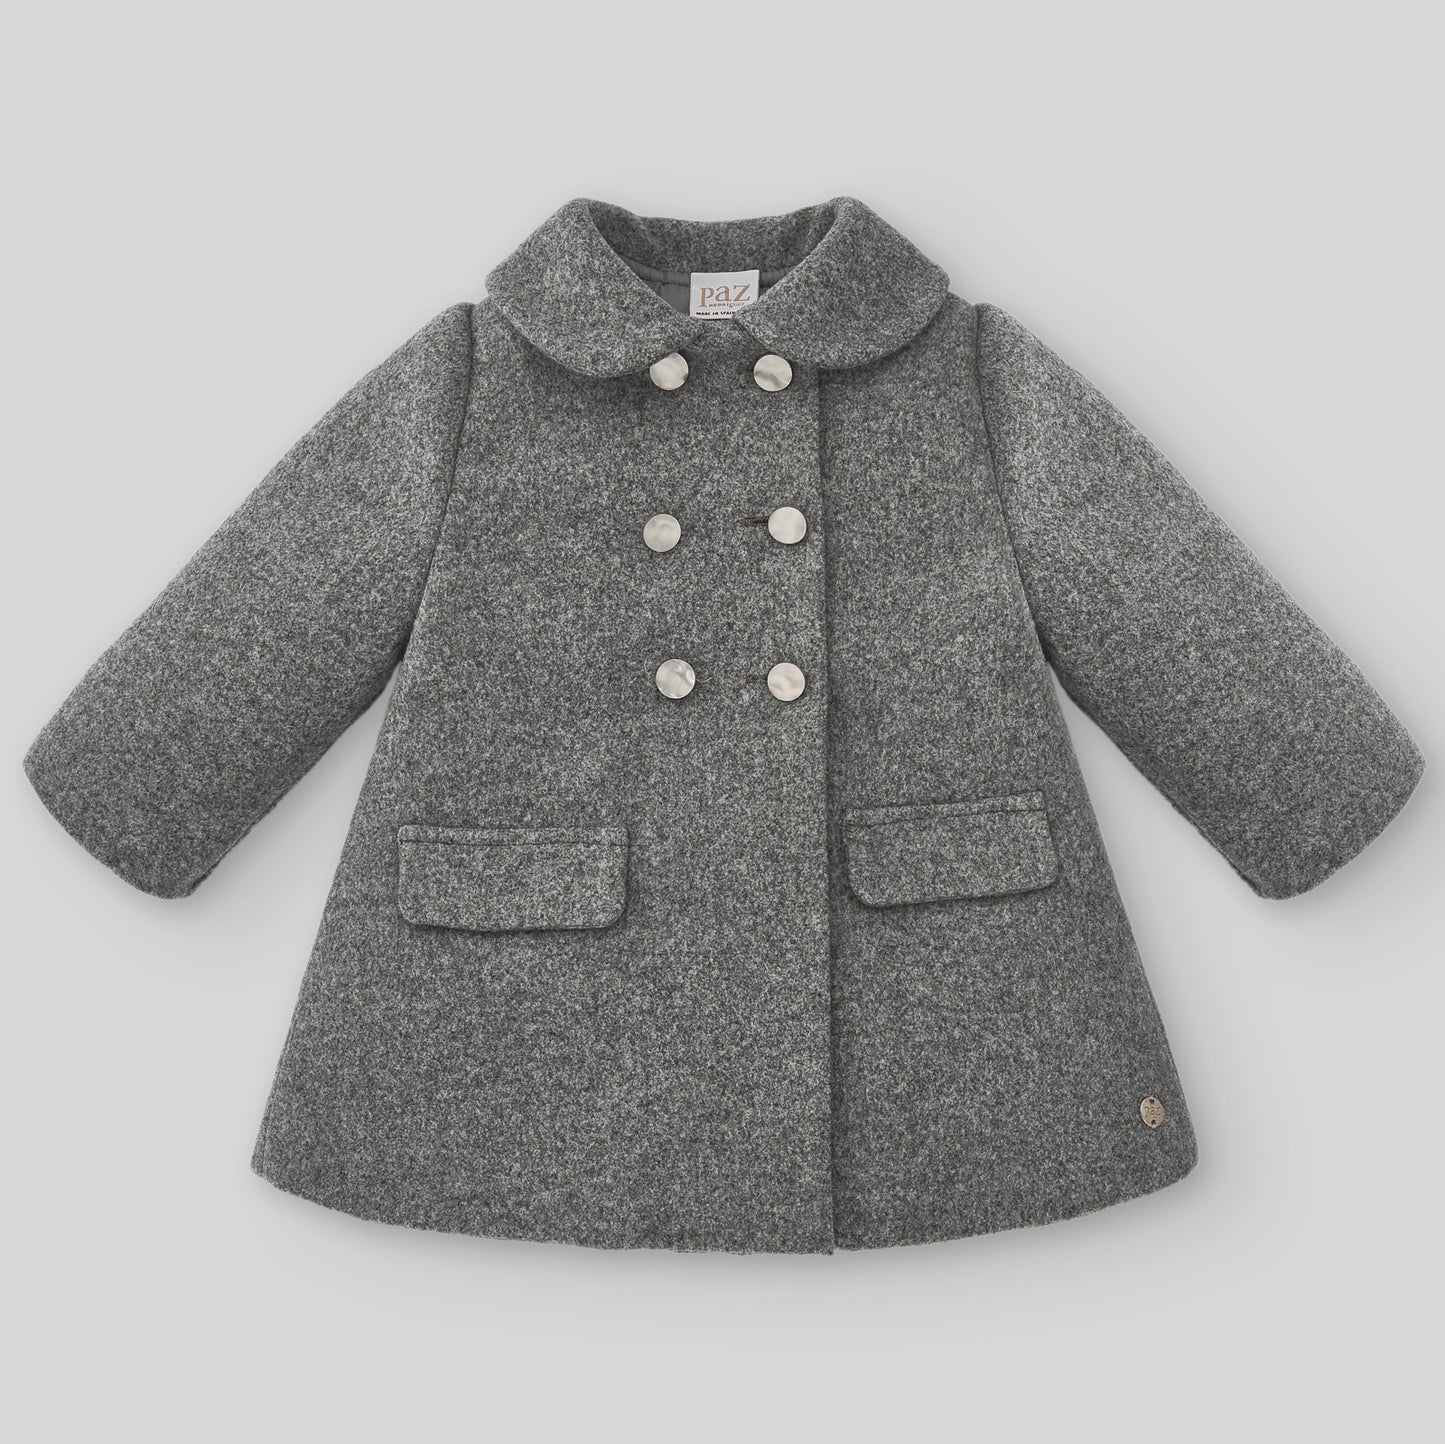 PAZ RODRIGUEZ Gray double-breasted coat